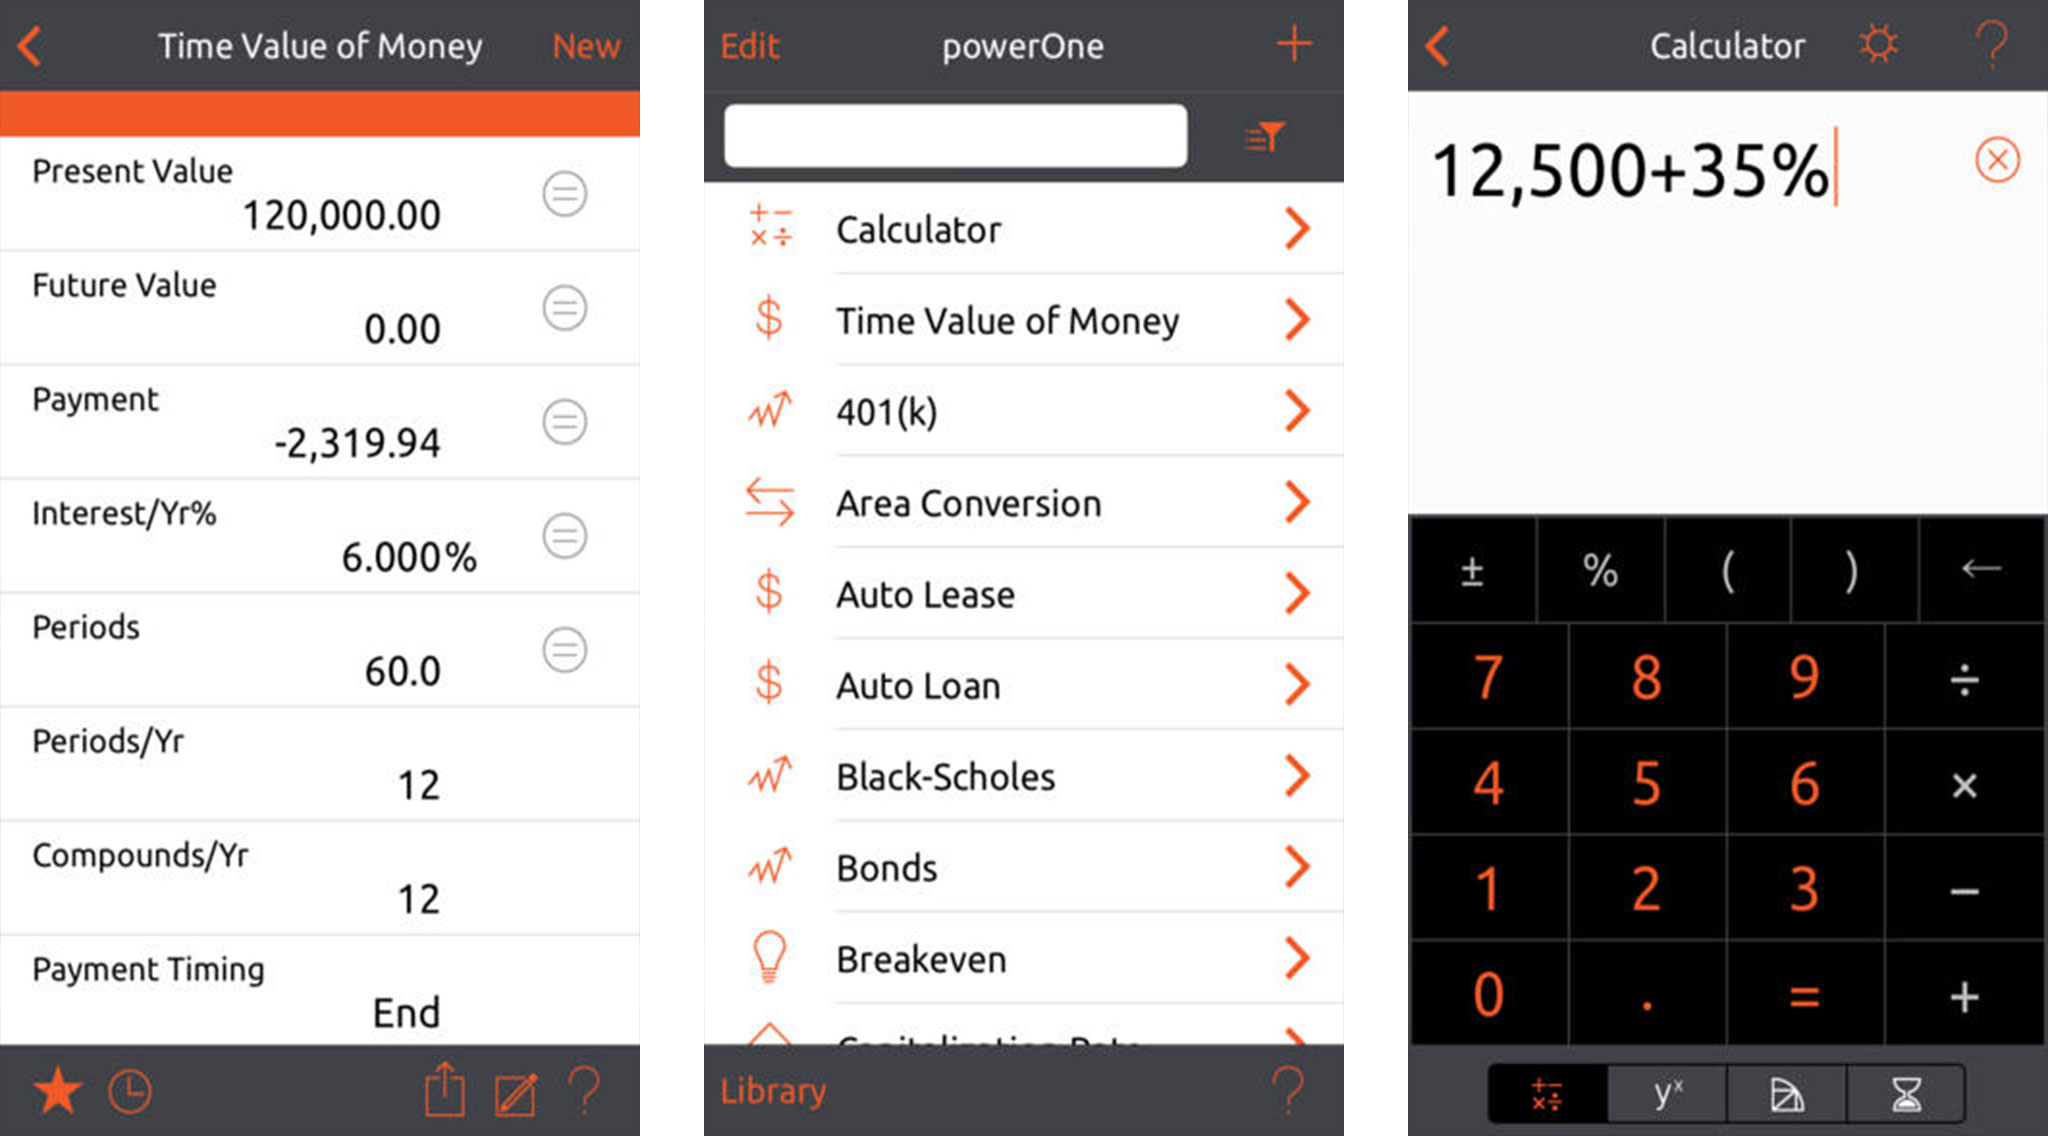 Best apps for accountants and CPAs: powerOne